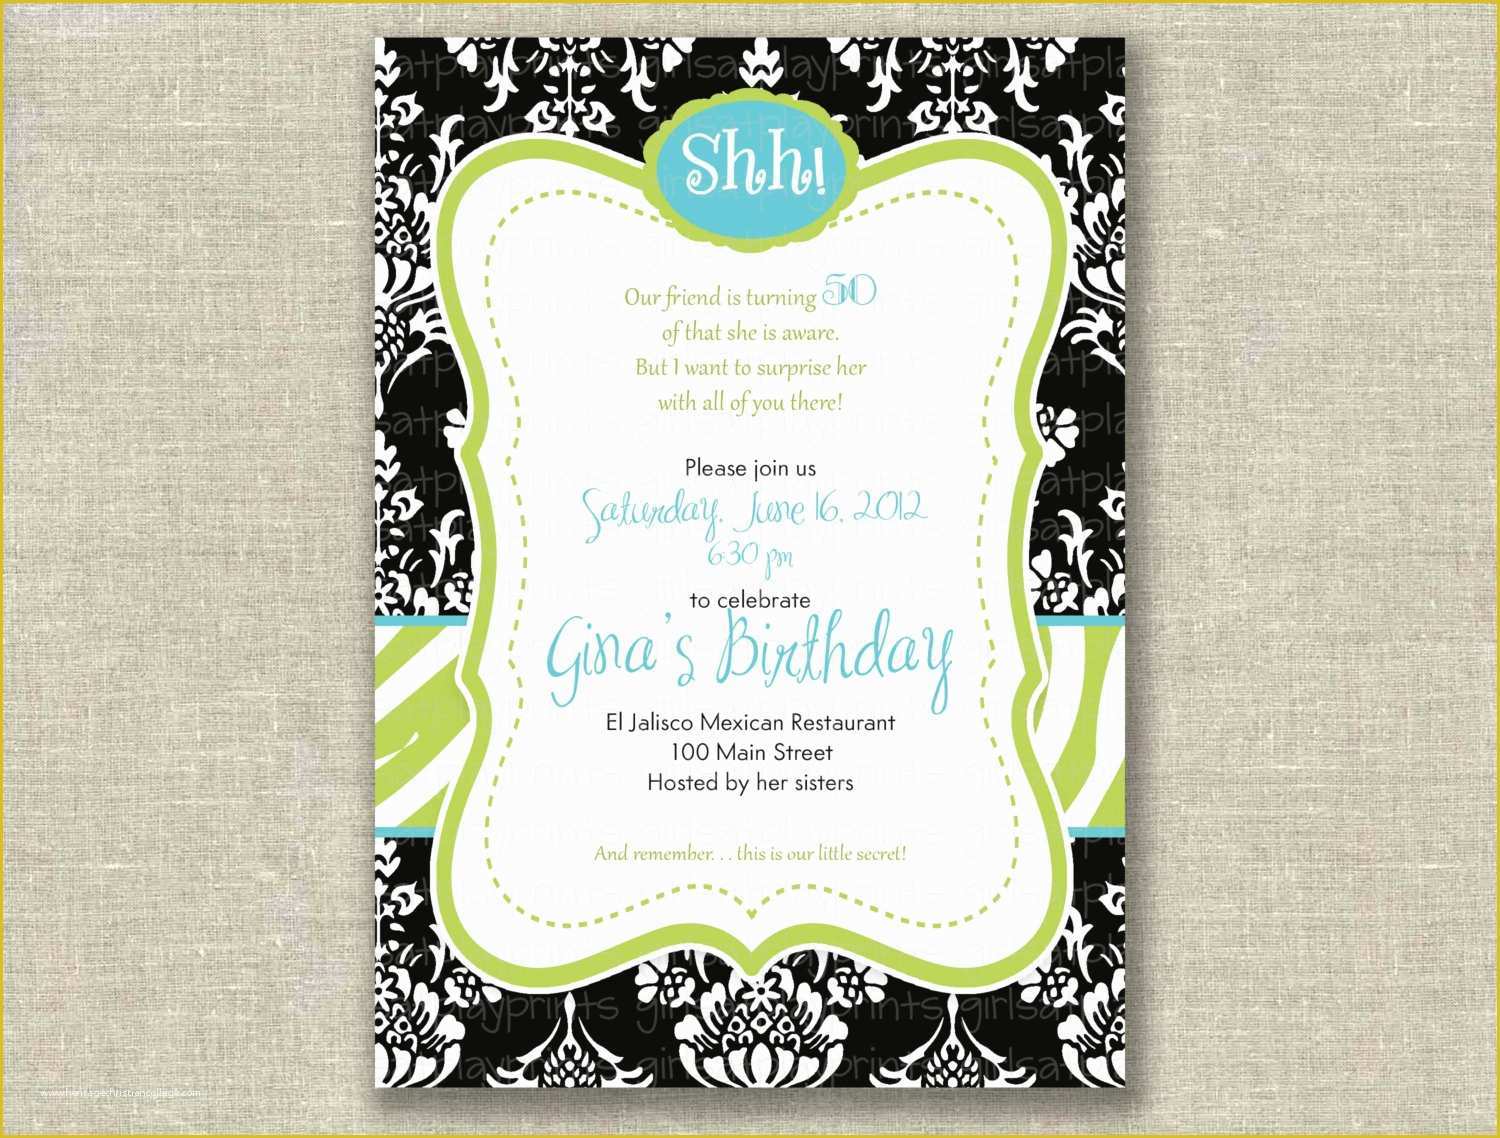 Free Surprise 50th Birthday Party Invitations Templates Of 14 50 Birthday Invitations Designs – Free Sample